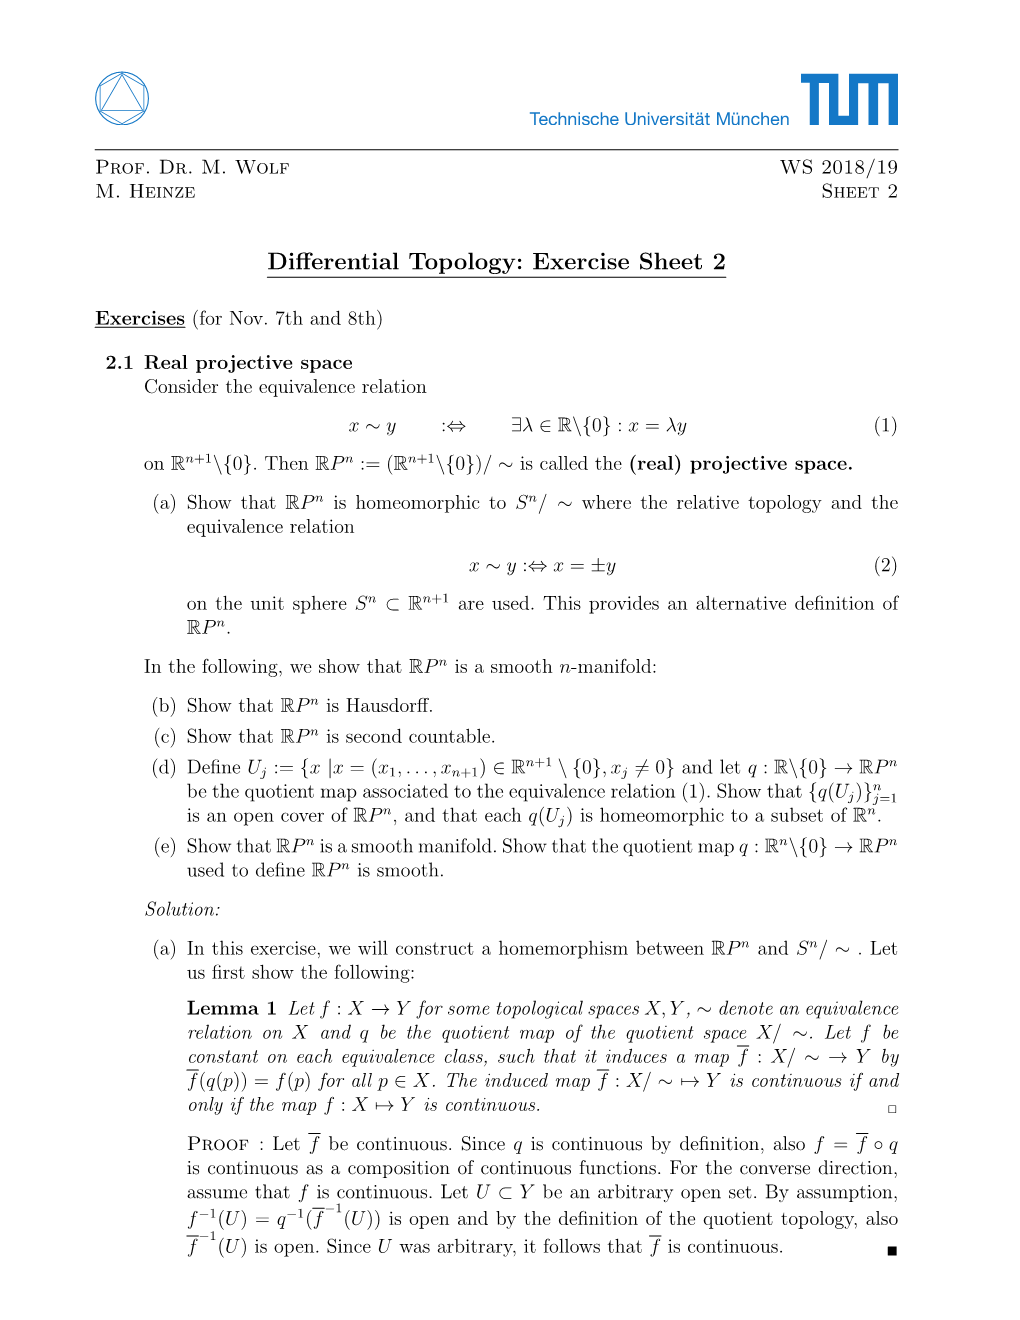 Differential Topology: Exercise Sheet 2